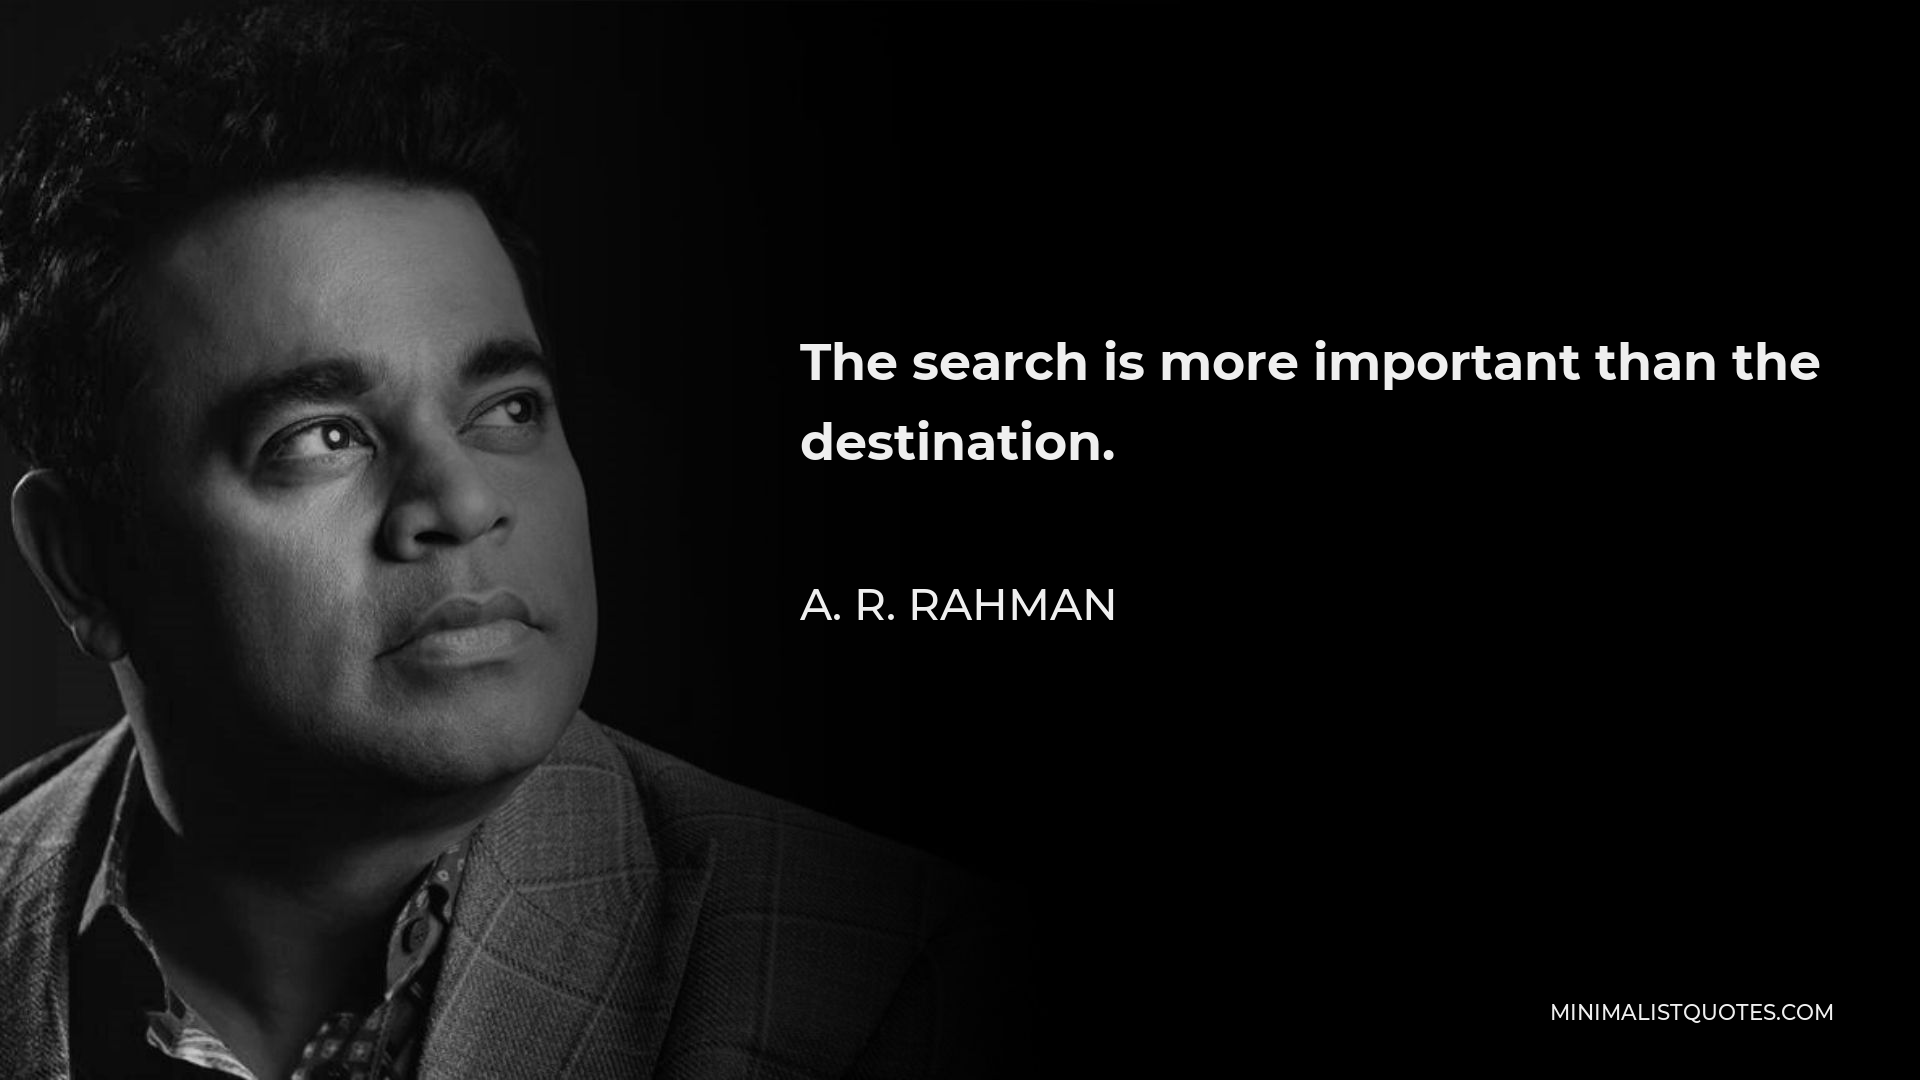 A. R. Rahman Quote - The search is more important than the destination.